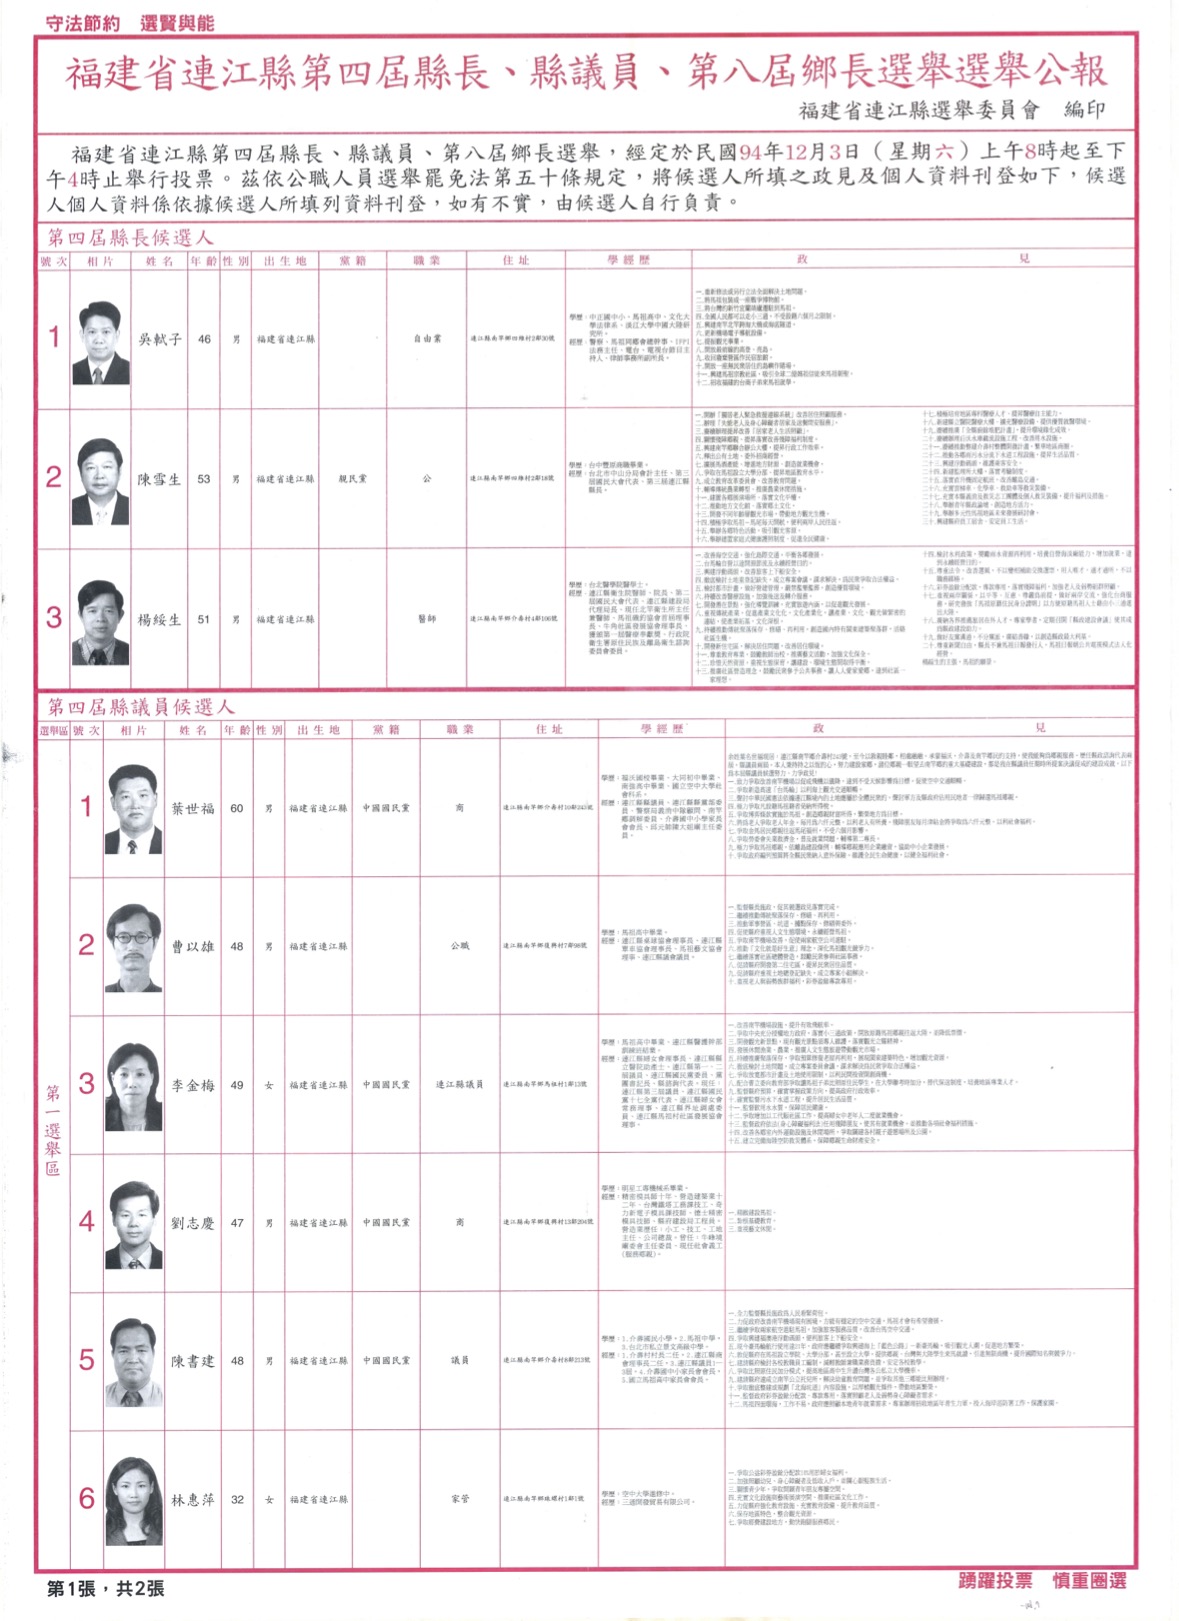 December 2005, the bulletin of the fourth Lienchiang County Magistrate and Council Member election, and the eighth Township Mayor election.